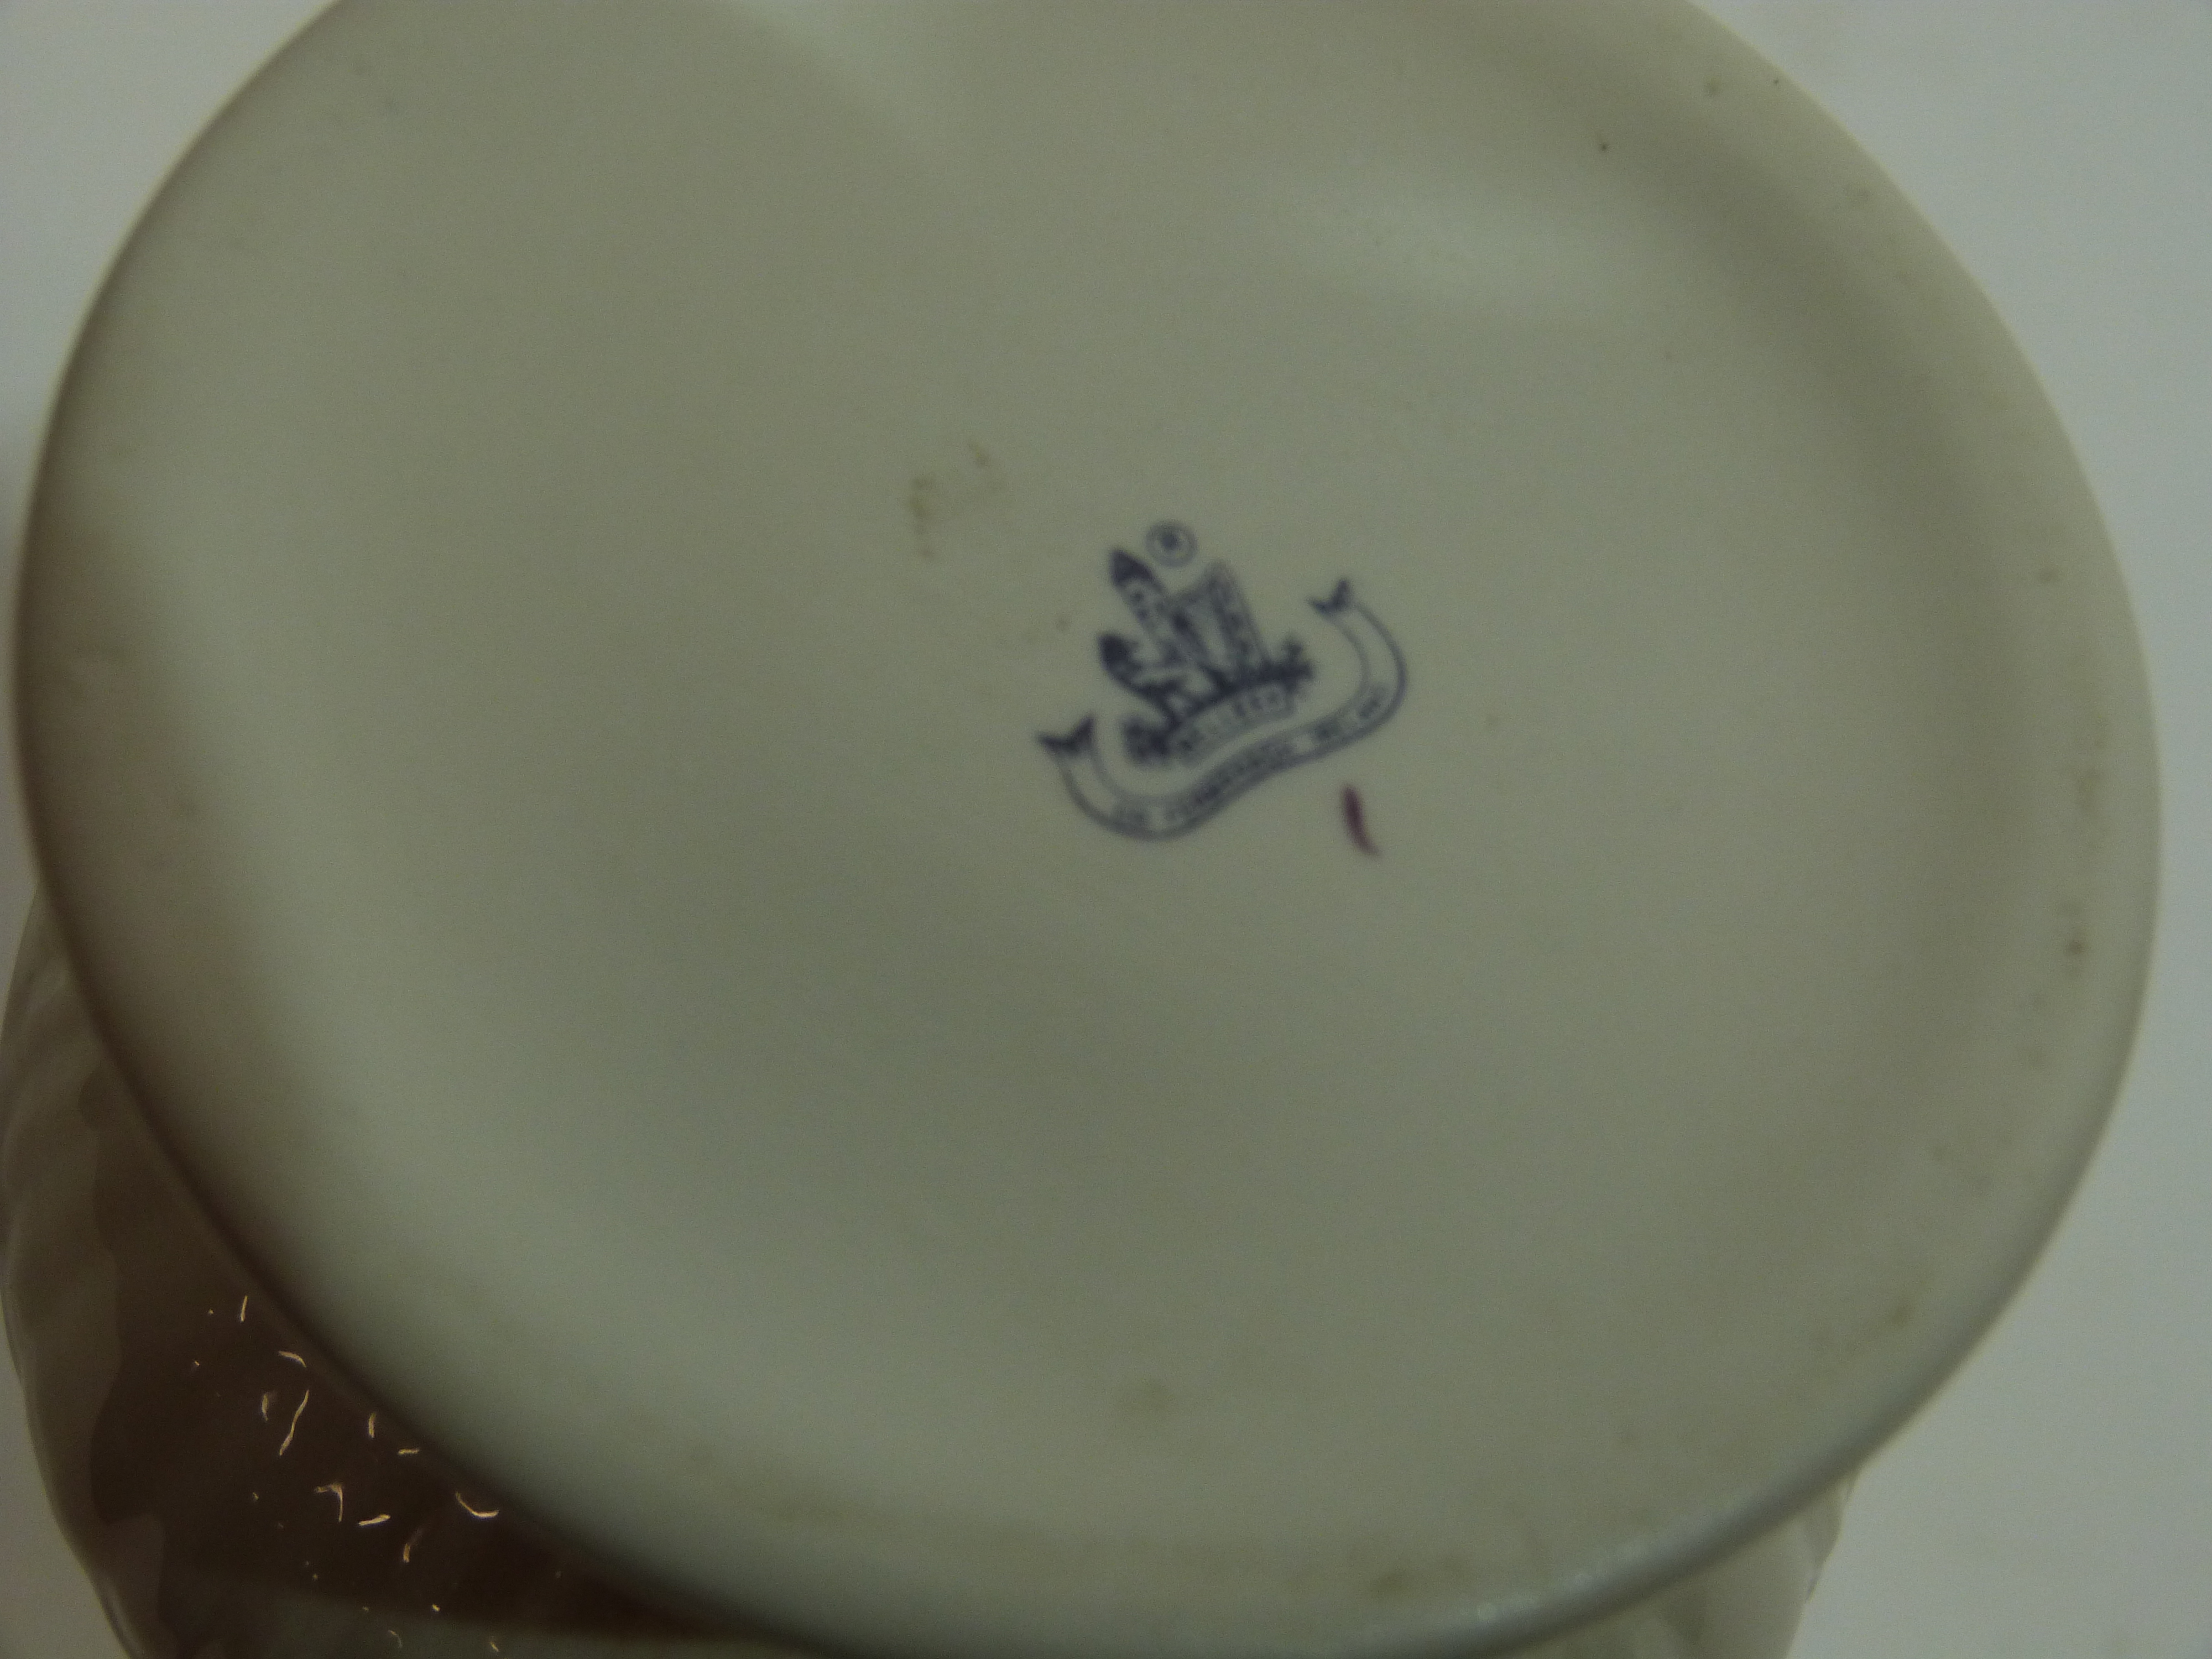 Belleek vase with a floral design of leaves and flowers in relief - Image 4 of 4